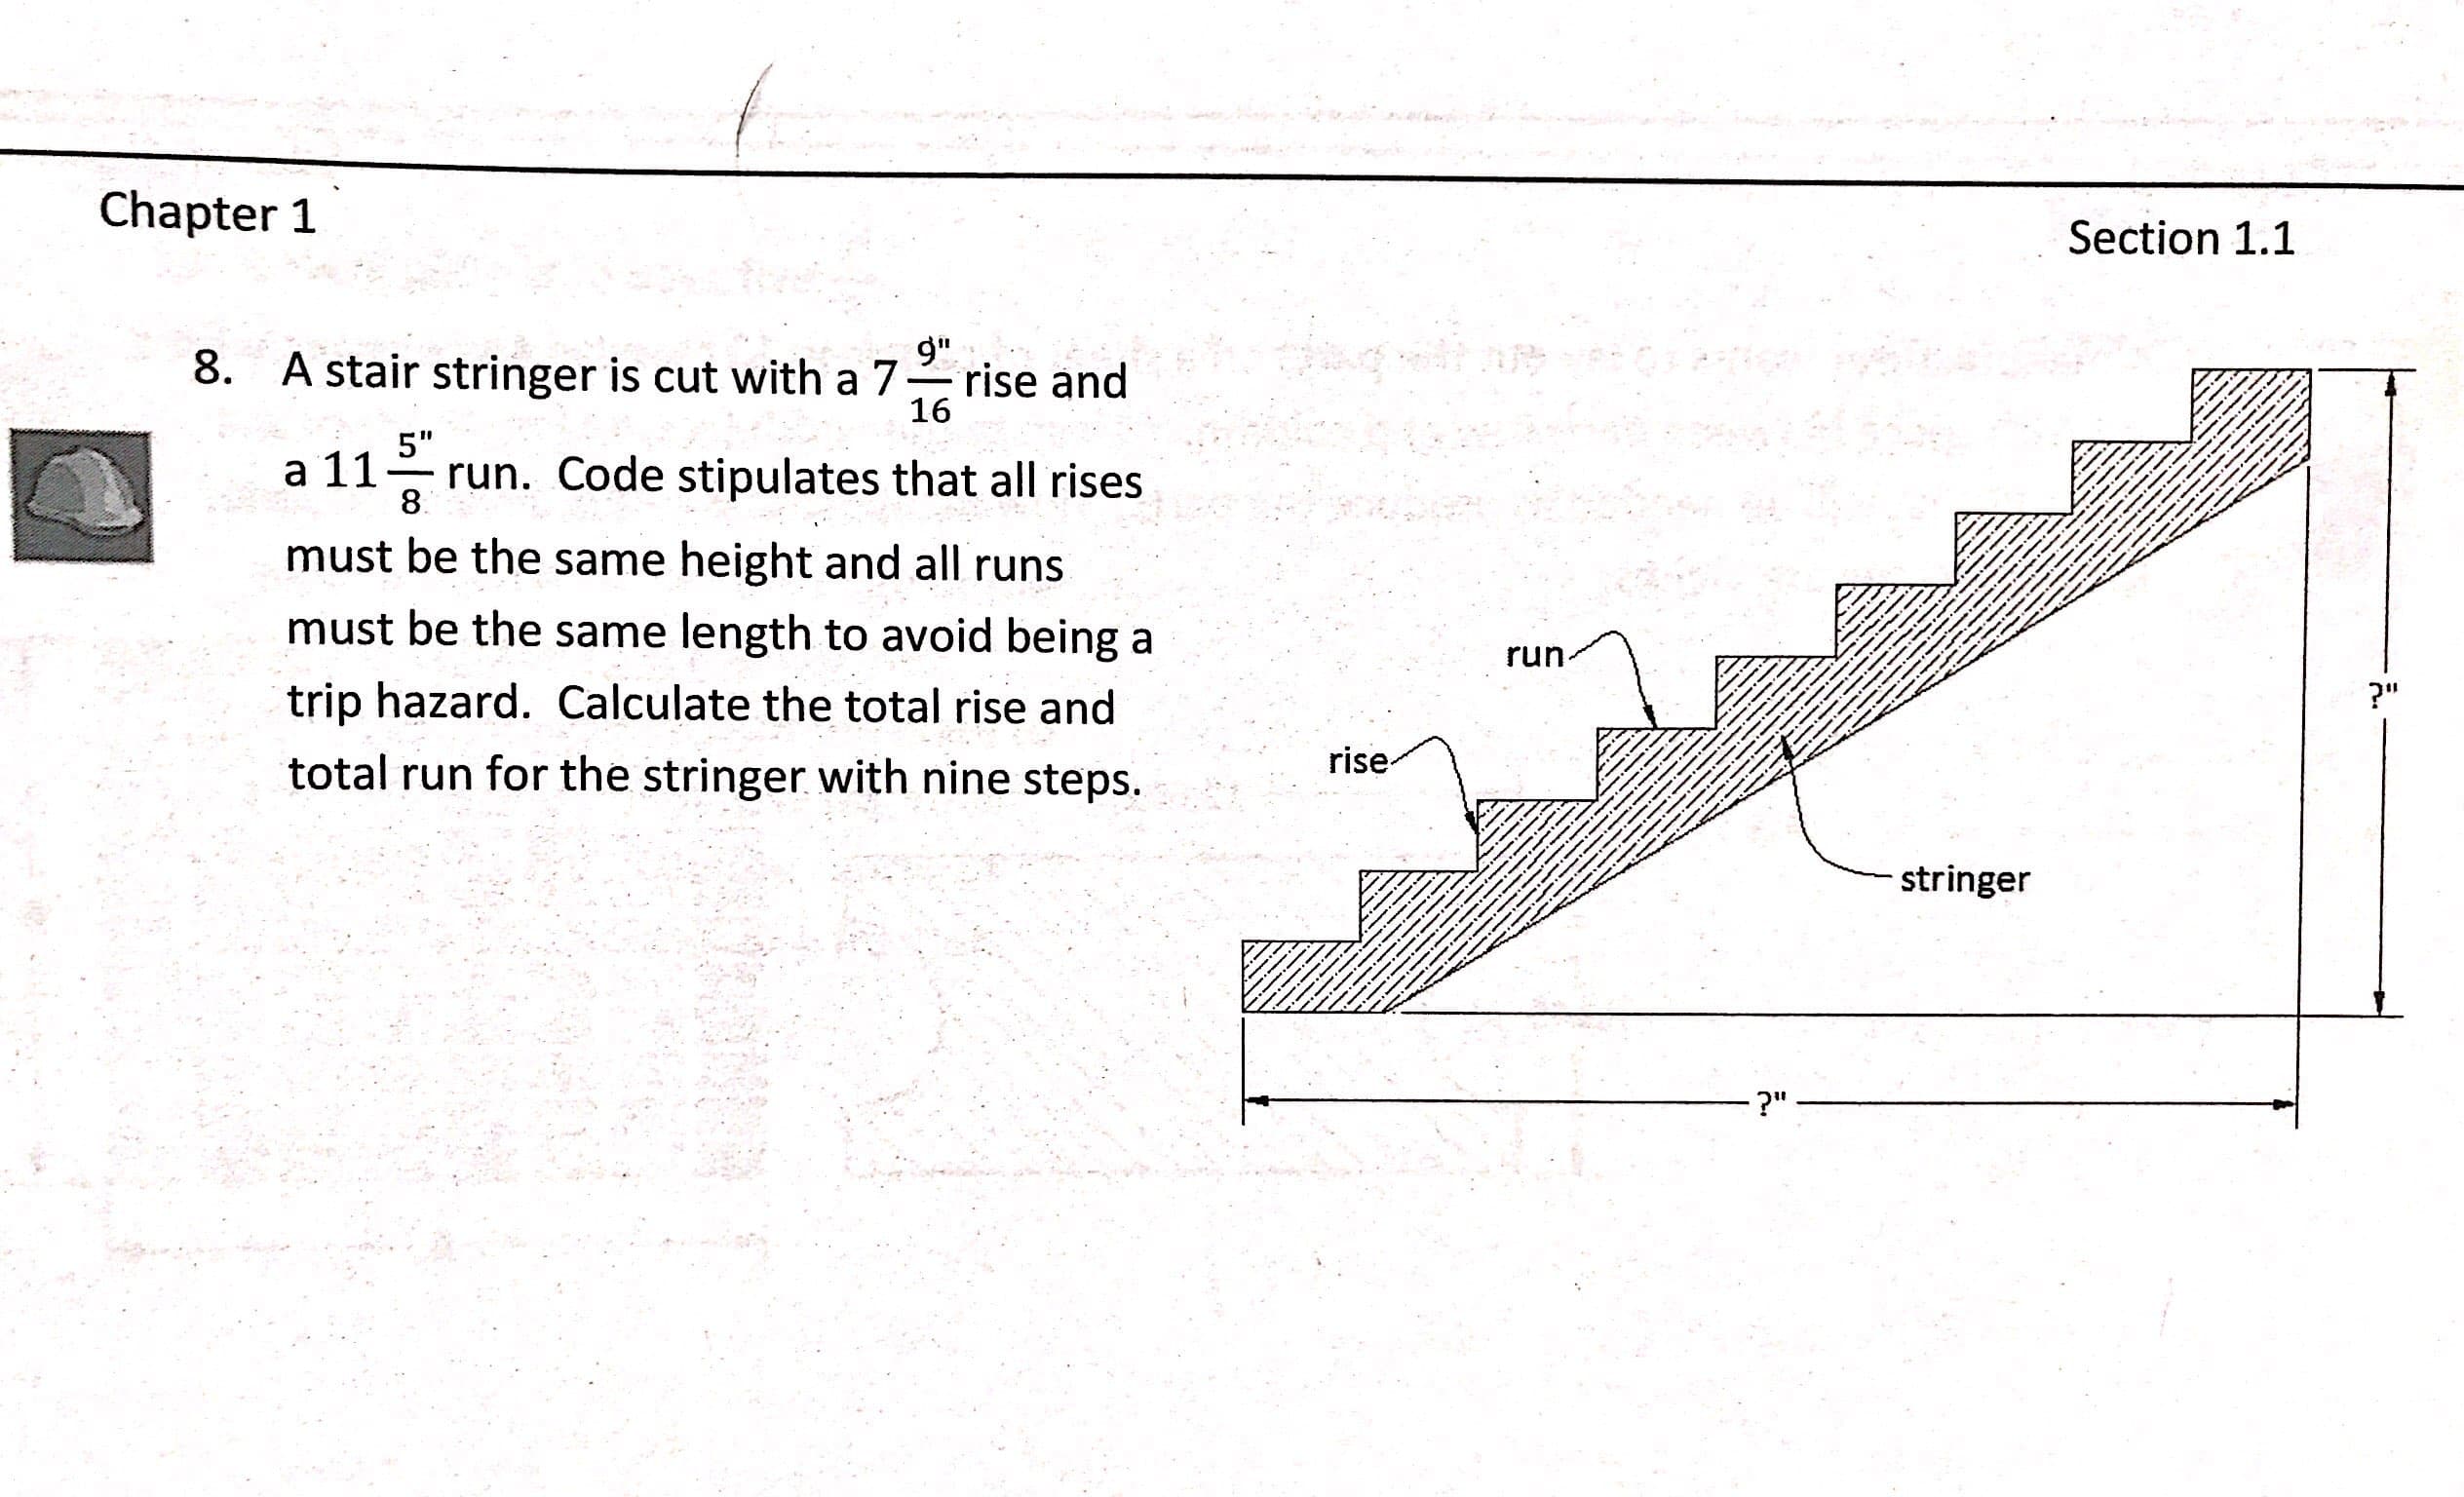 Chapter 1
Section 1.1
9"
8. A stair stringer is cut with a 7
rise and
16
5"
a 11 Code stipulates that all rises
must be the same height and all runs
must be the same length to avoid being a
trip hazard. Calculate the total rise and
total run for the stringer with nine steps.
8
run
rise
stringer
